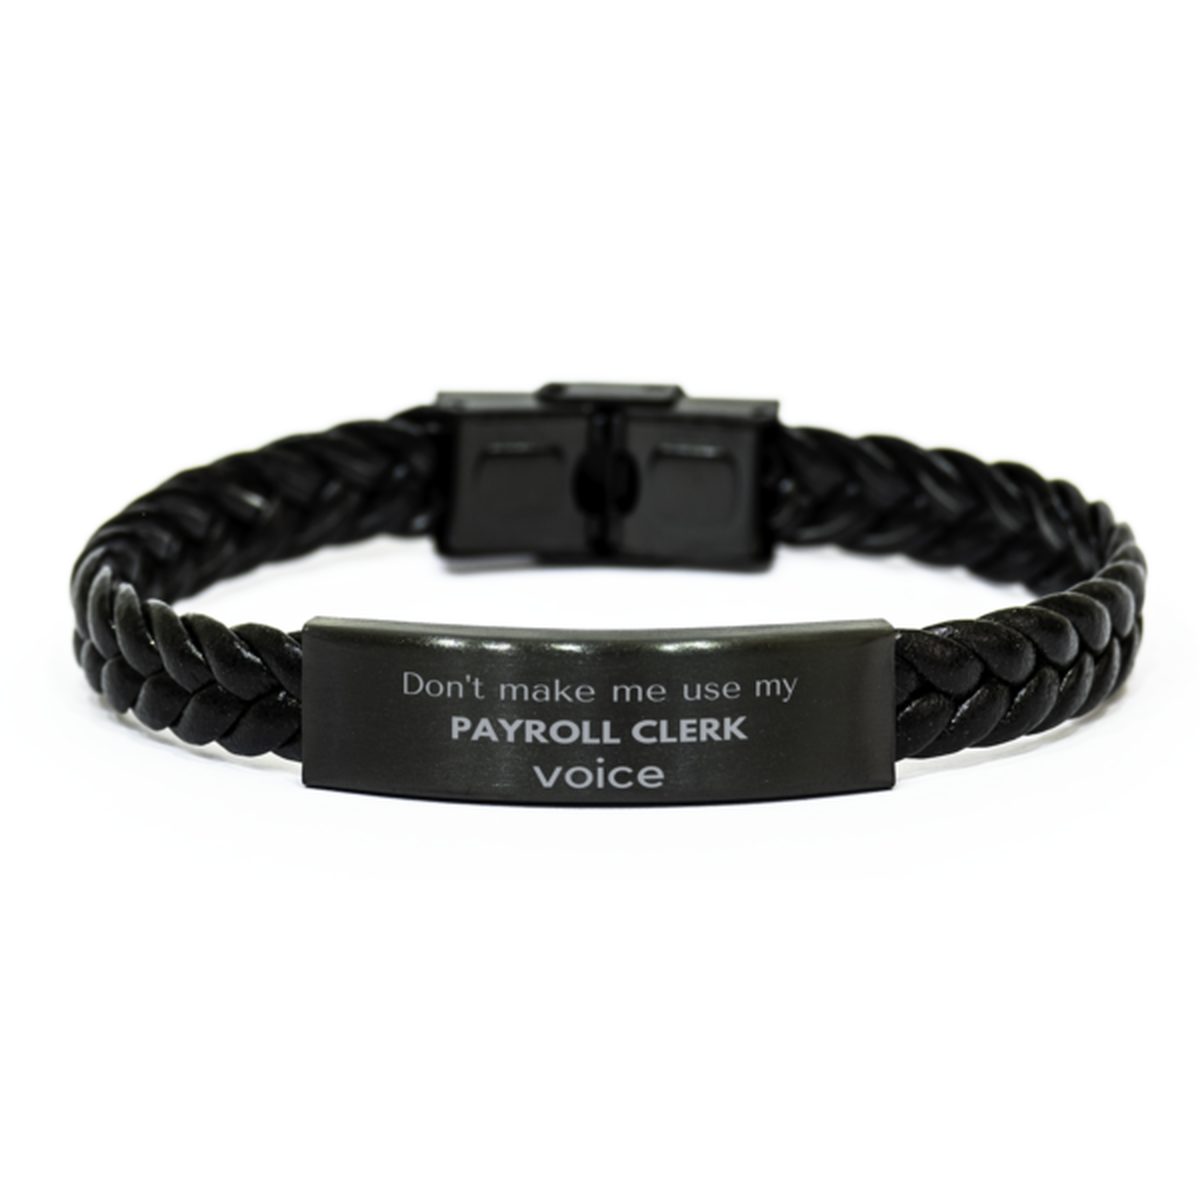 Don't make me use my Payroll Clerk voice, Sarcasm Payroll Clerk Gifts, Christmas Payroll Clerk Braided Leather Bracelet Birthday Unique Gifts For Payroll Clerk Coworkers, Men, Women, Colleague, Friends